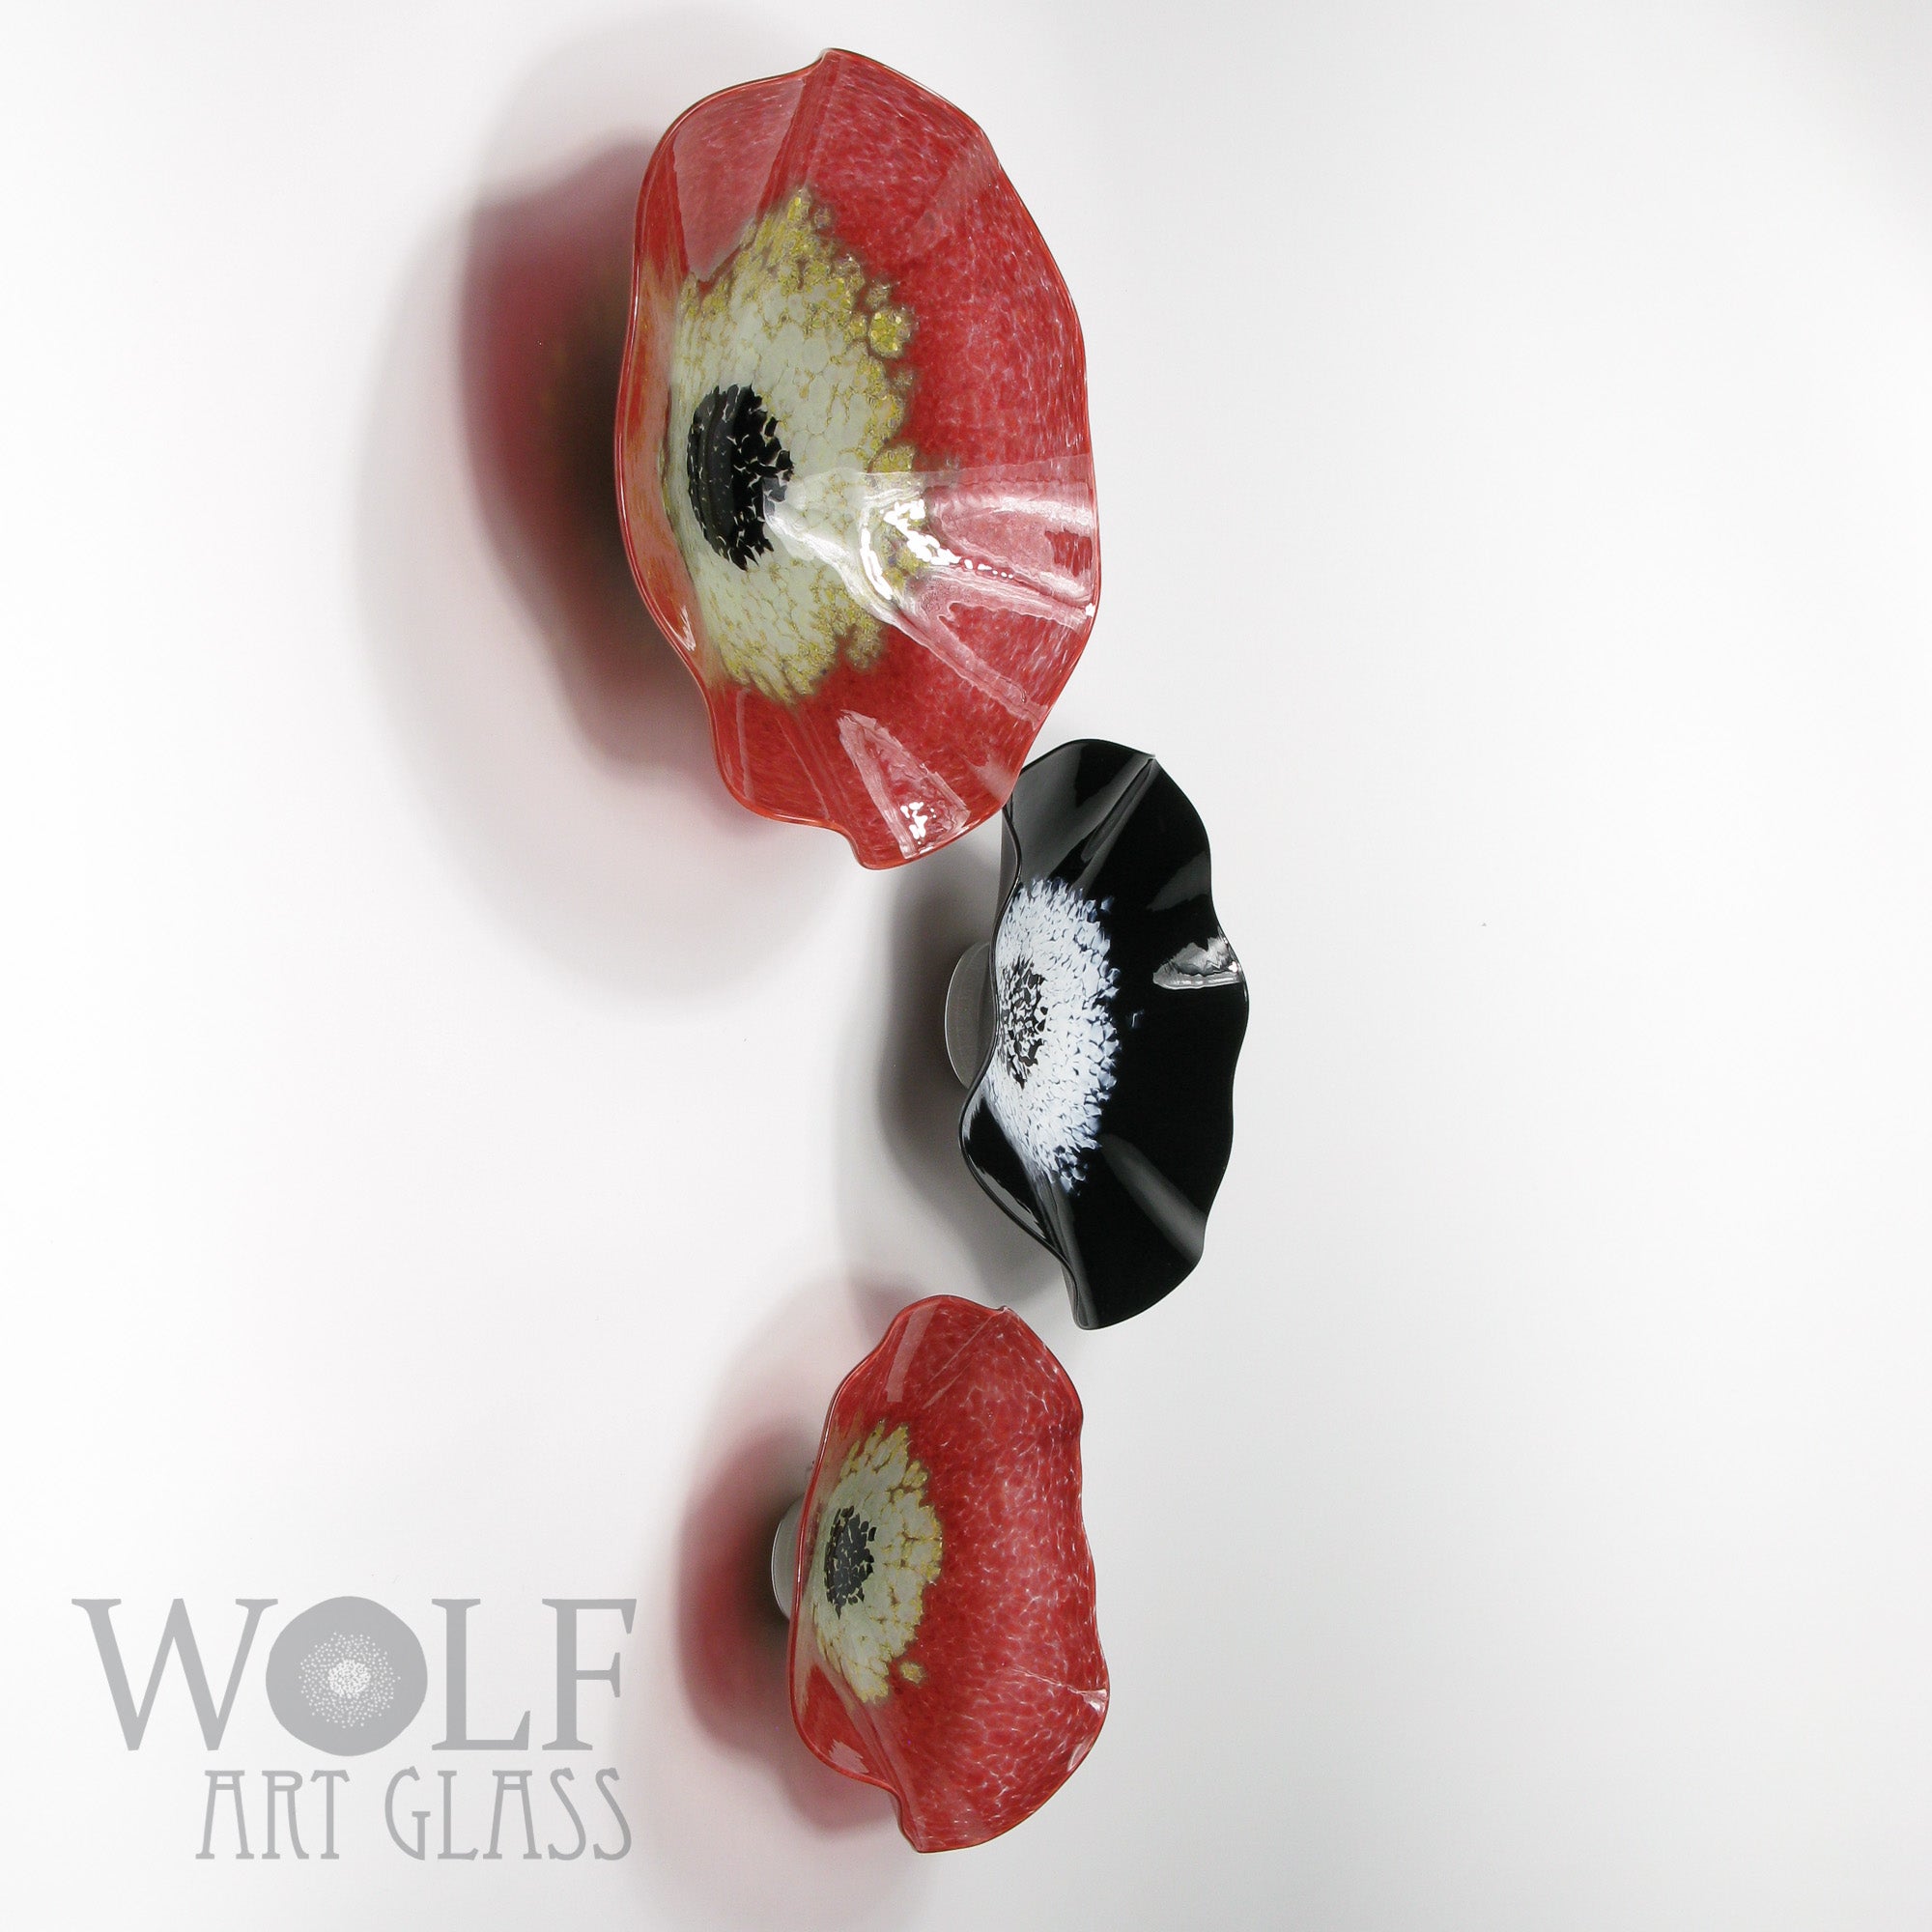 Red Rose Gold Black & White, Blown Glass Wall Art Collection 3 Piece Glass Sculpture Installation